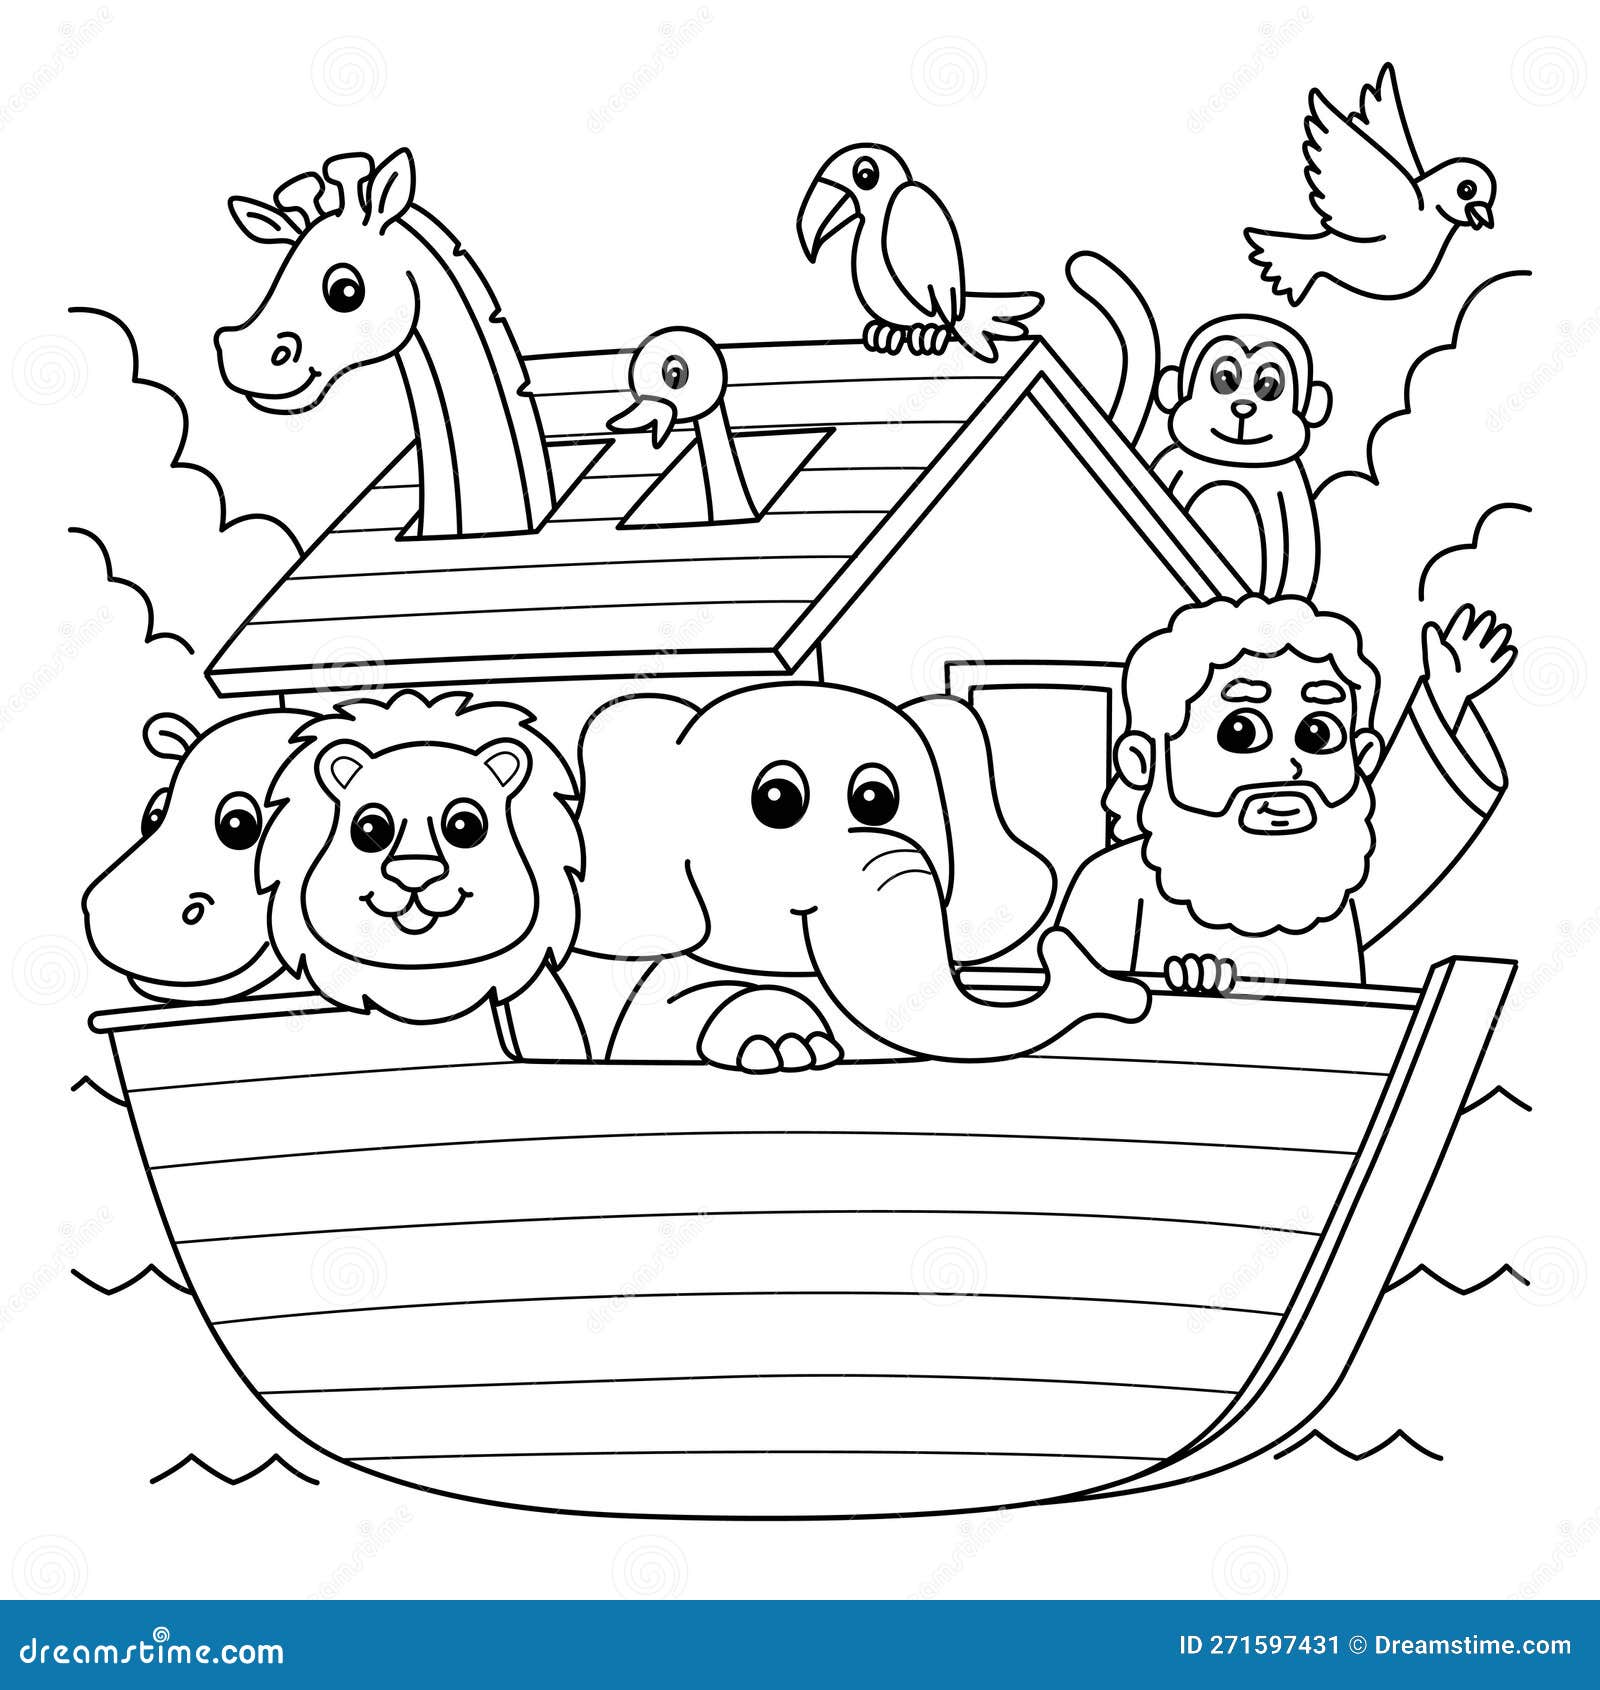 Noahs Ark Coloring Page for Kids Stock Vector - Illustration of vector ...